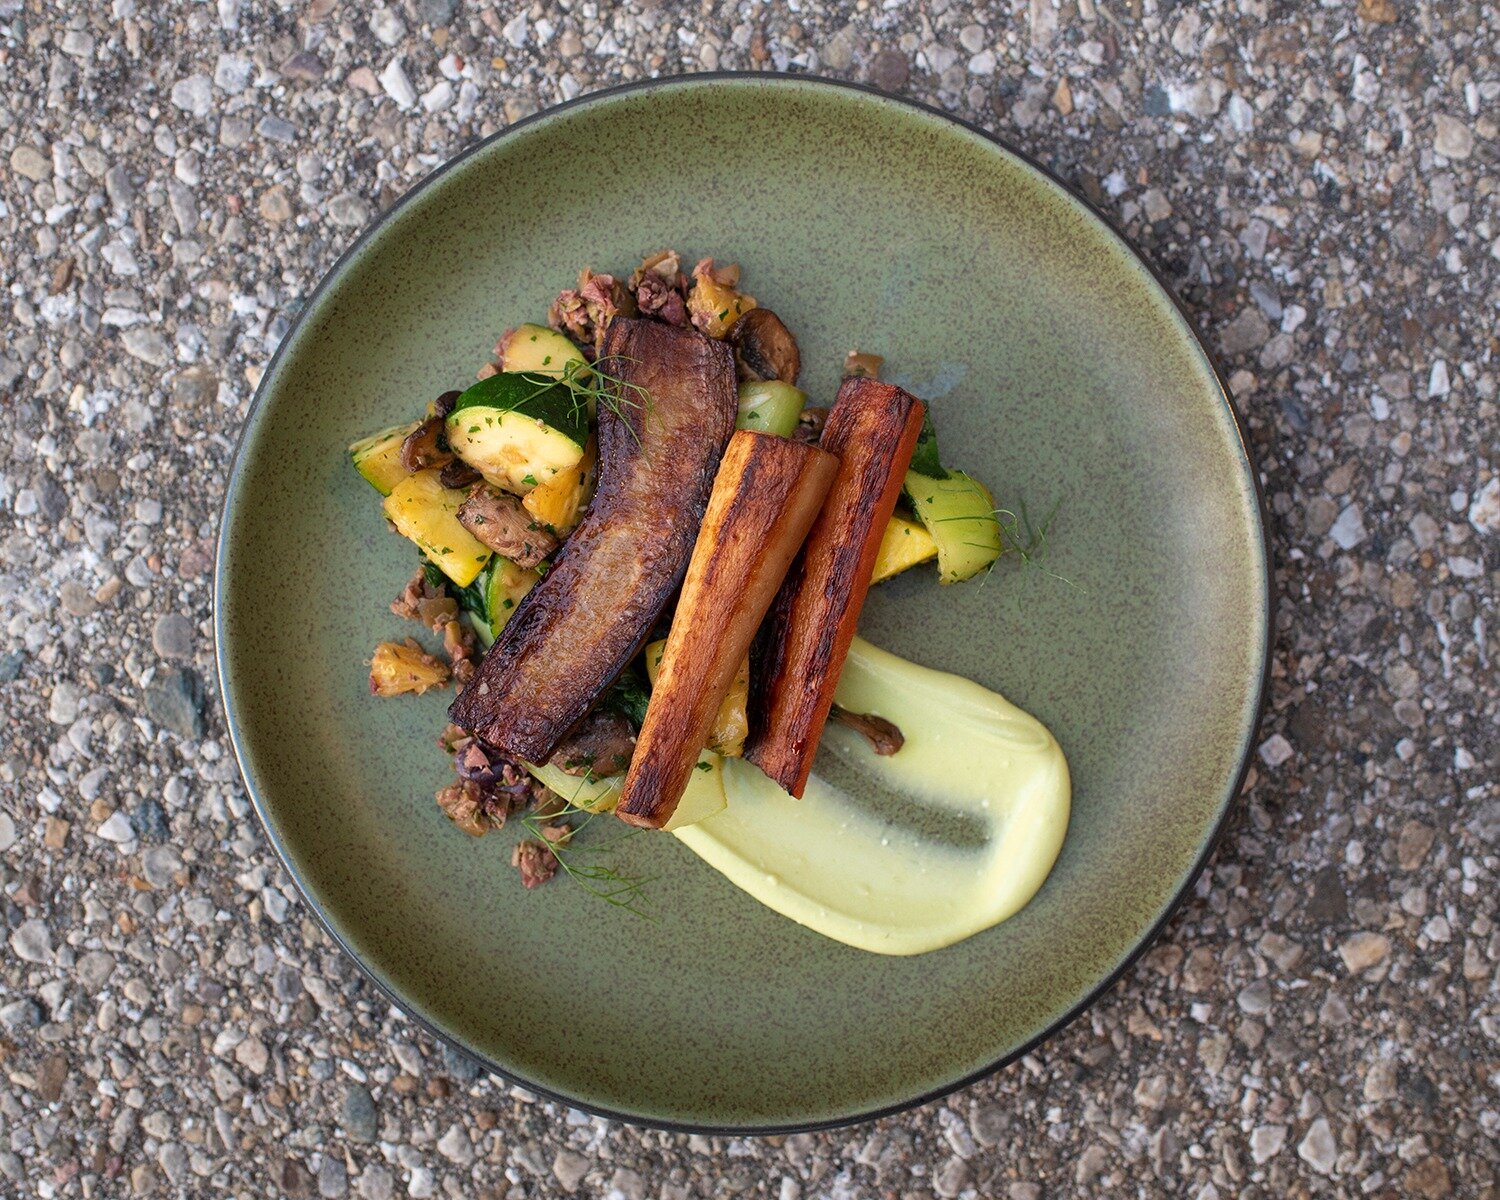 Savor the exquisite blend of flavors in our Braised Carrots dish&mdash;each carrot infused with tenderness, complemented by the crisp freshness of bok choy, the earthy richness of mushrooms, and the subtle sweetness of squash. Crowned with a parsley 